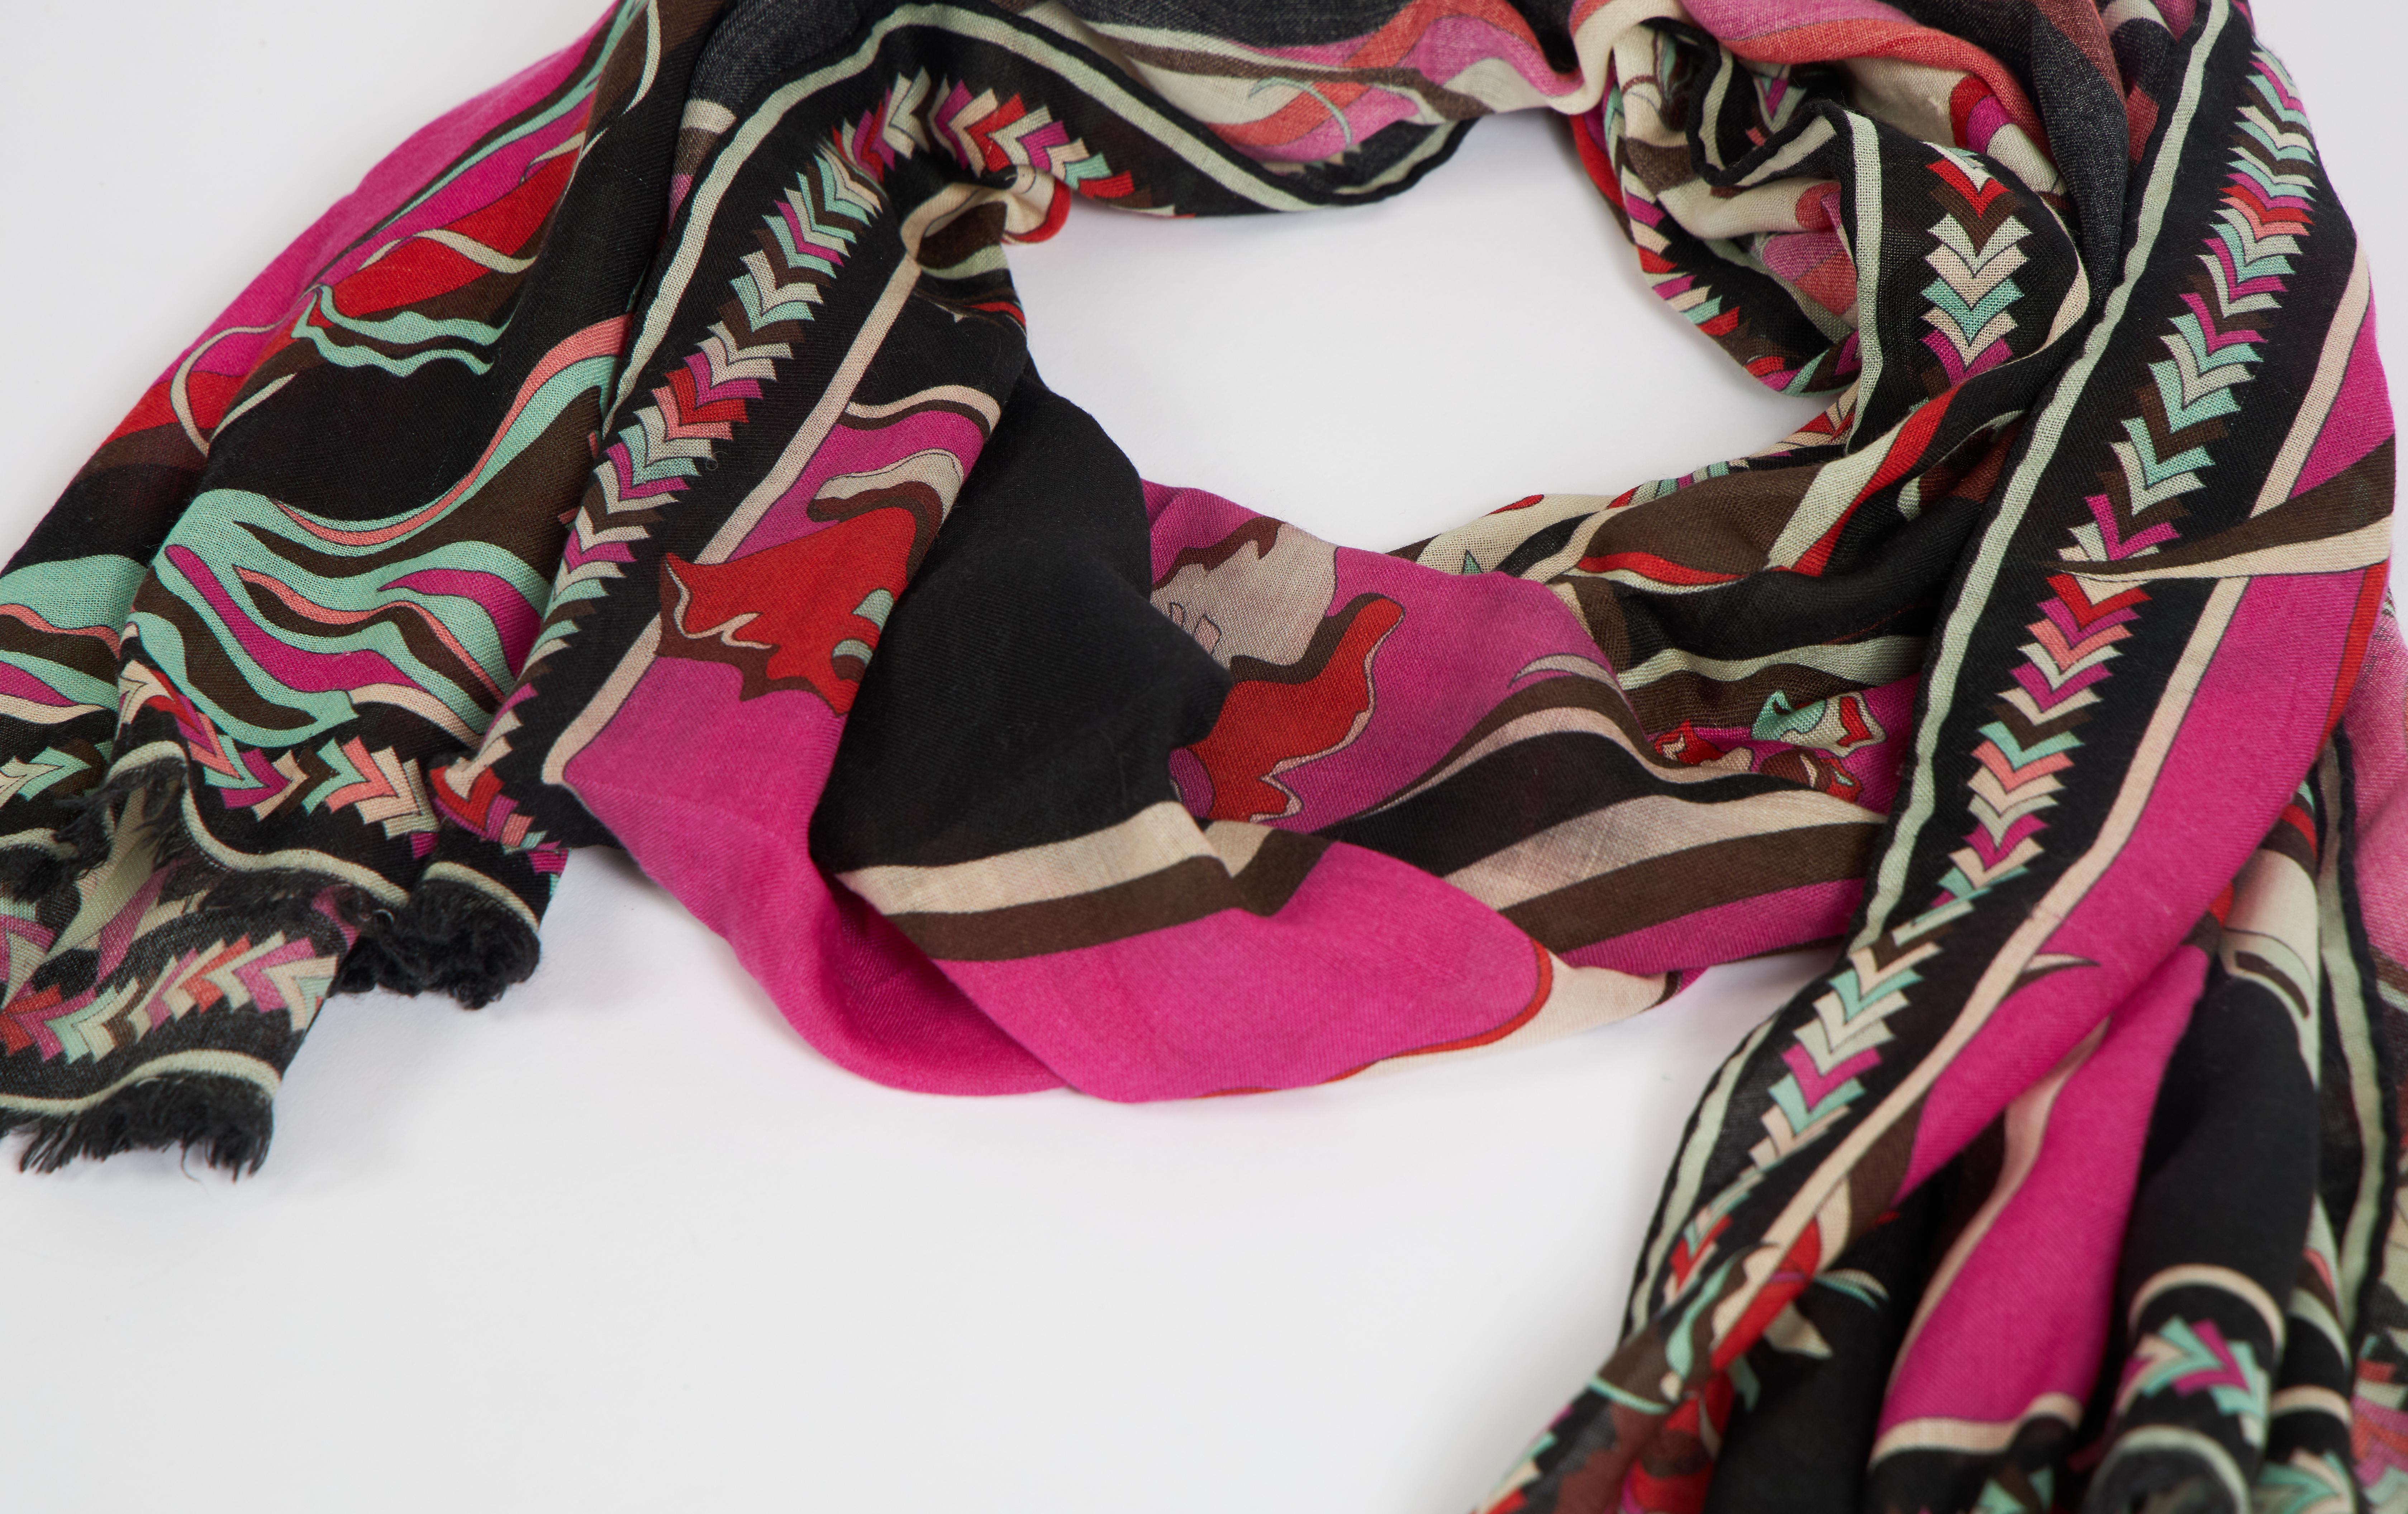 Signature Pucci made in Italy 70% wool, 30% silk long scarf shawl. 